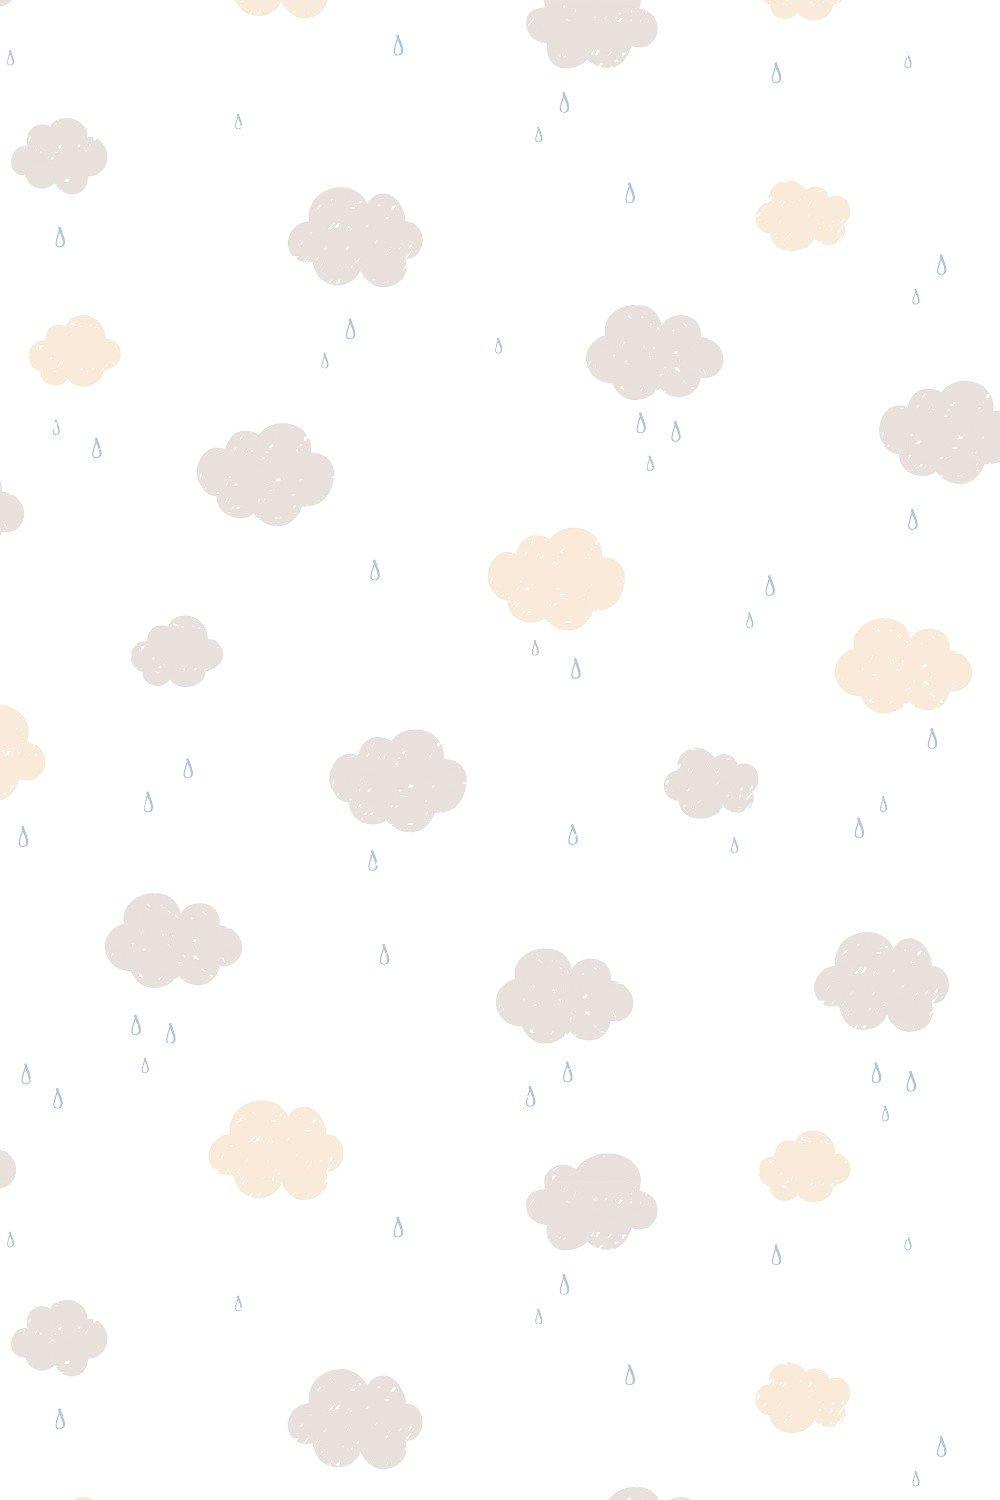 Eco-Friendly Childrens Cloud And Raindrop Wallpaper